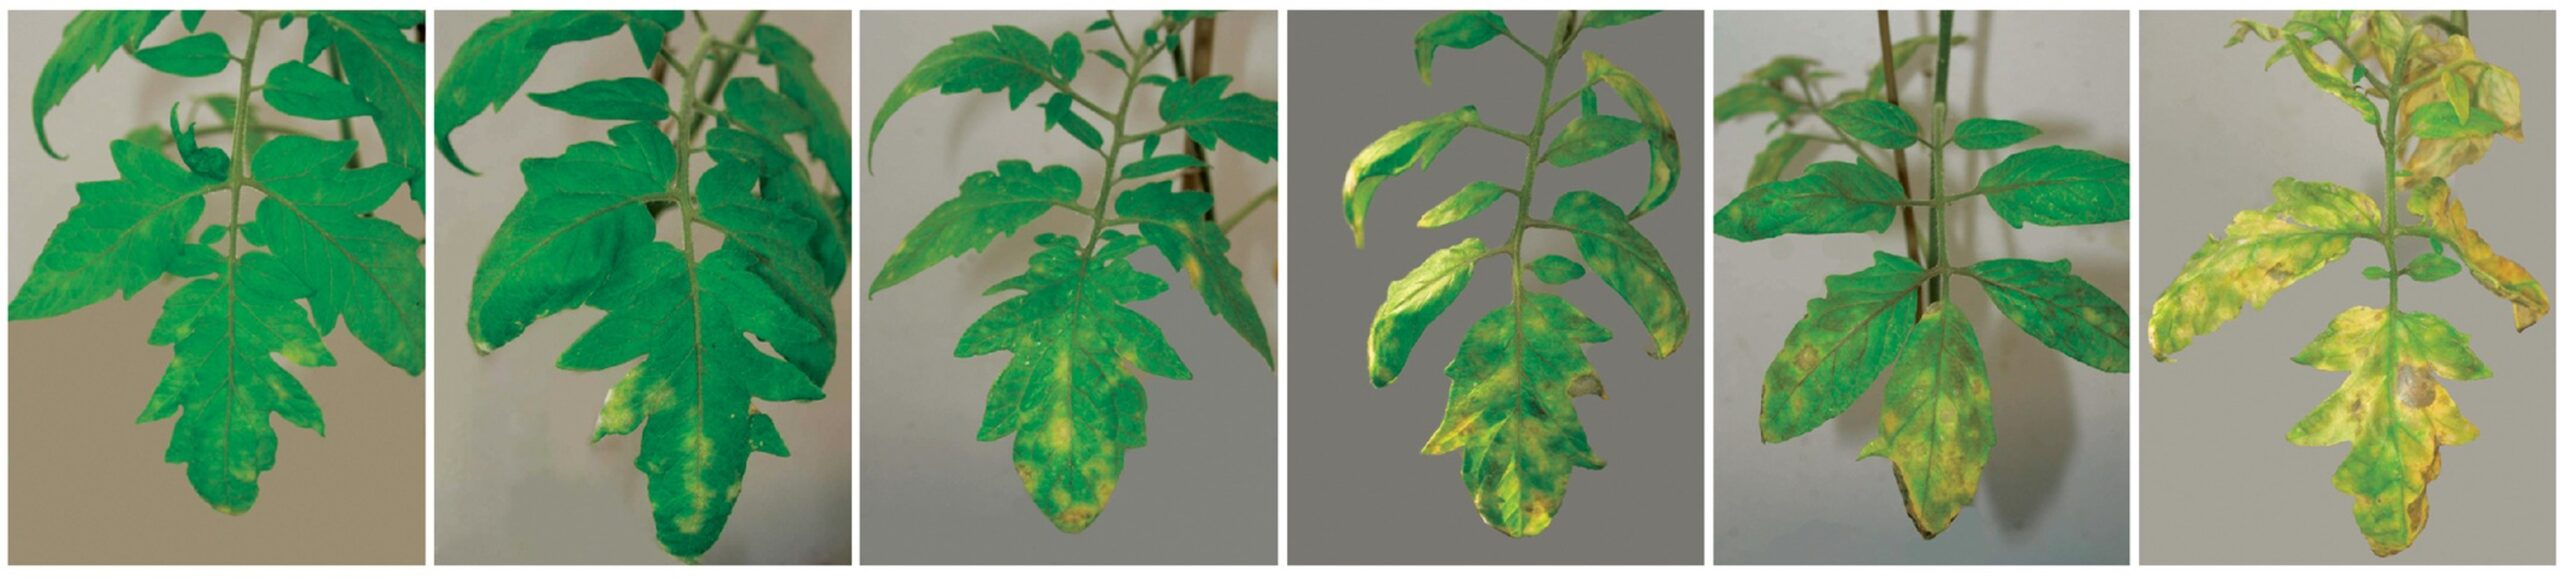 Botrytis or grey mold on Tomato Leaves